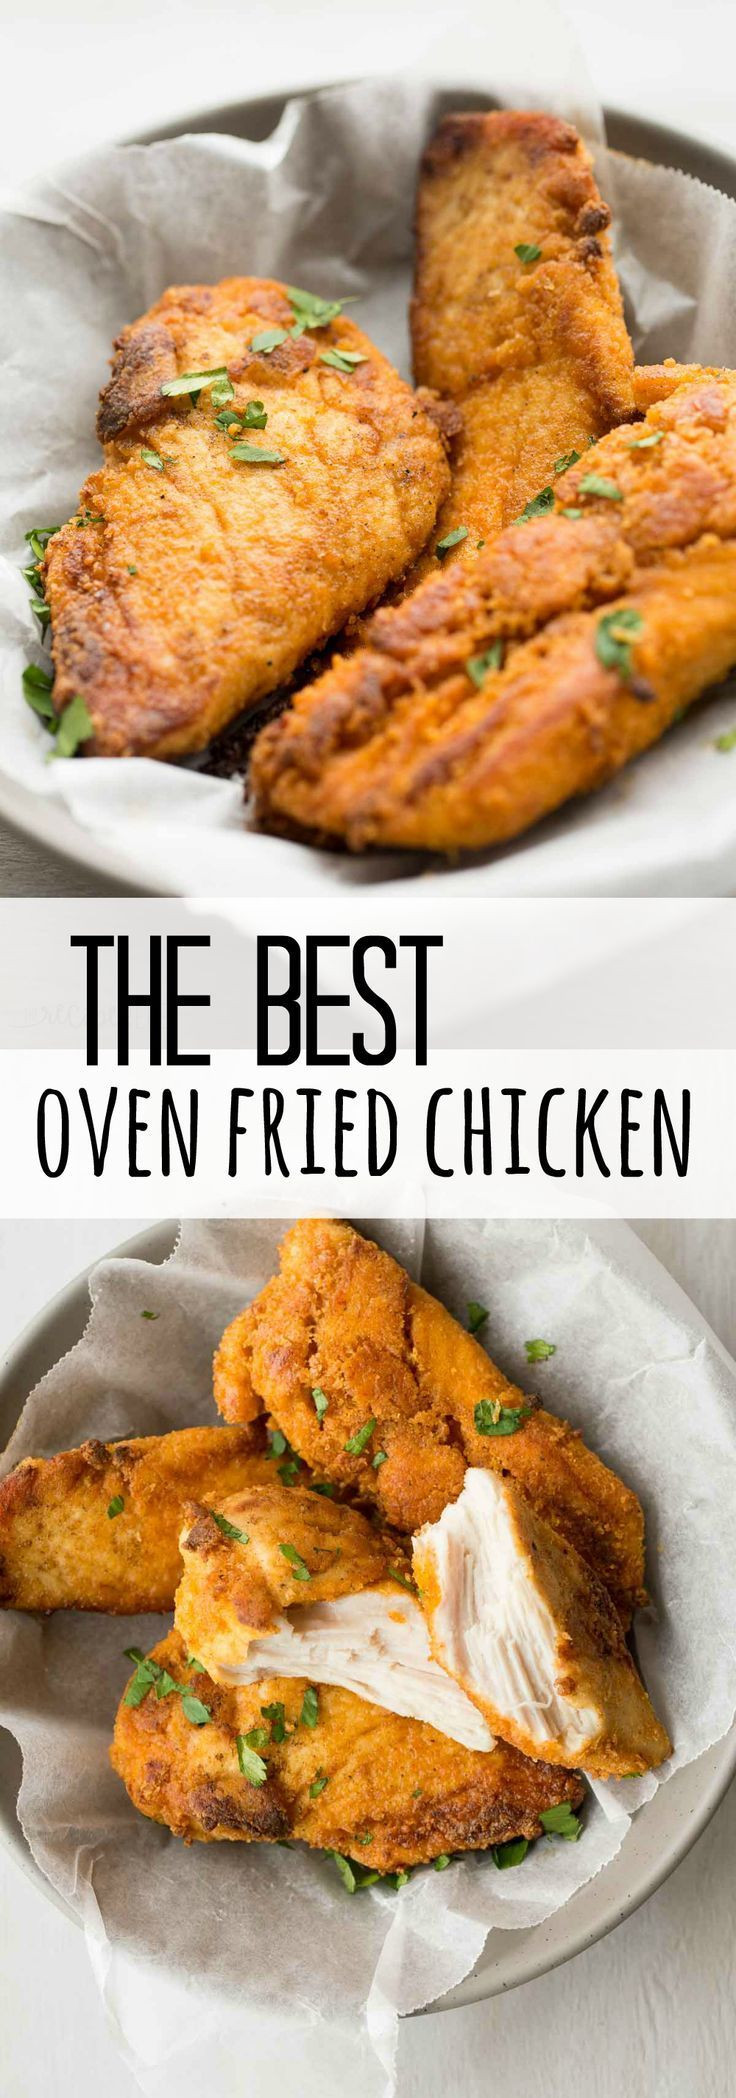 Best Oven Fried Chicken
 Easy oven fried chicken that tastes just like KFC but